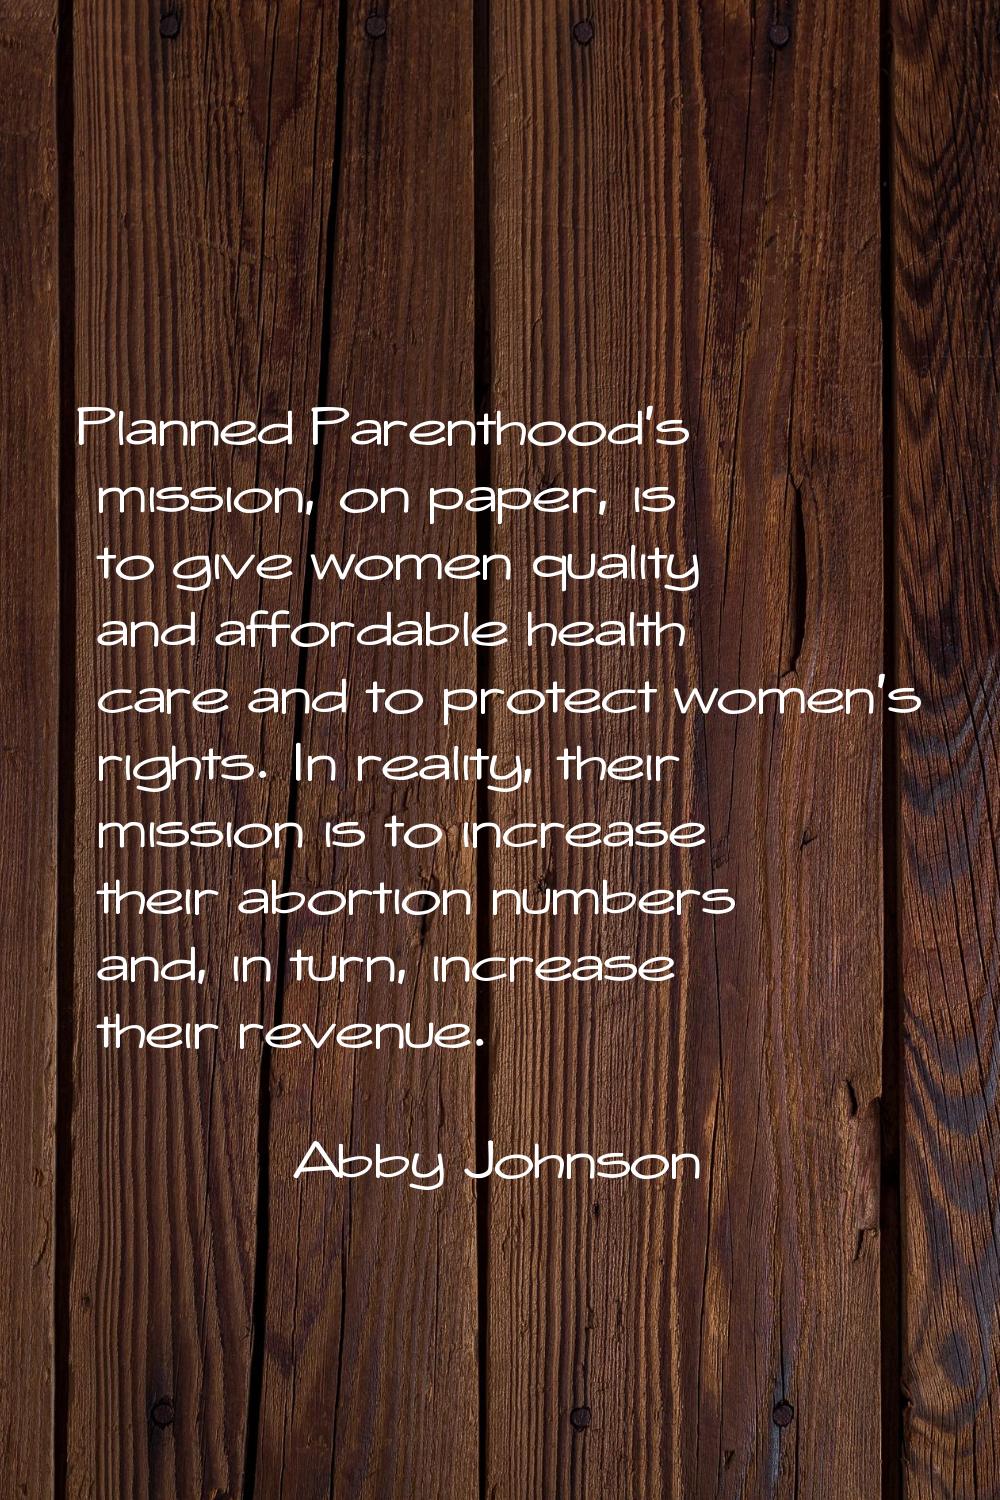 Planned Parenthood's mission, on paper, is to give women quality and affordable health care and to 